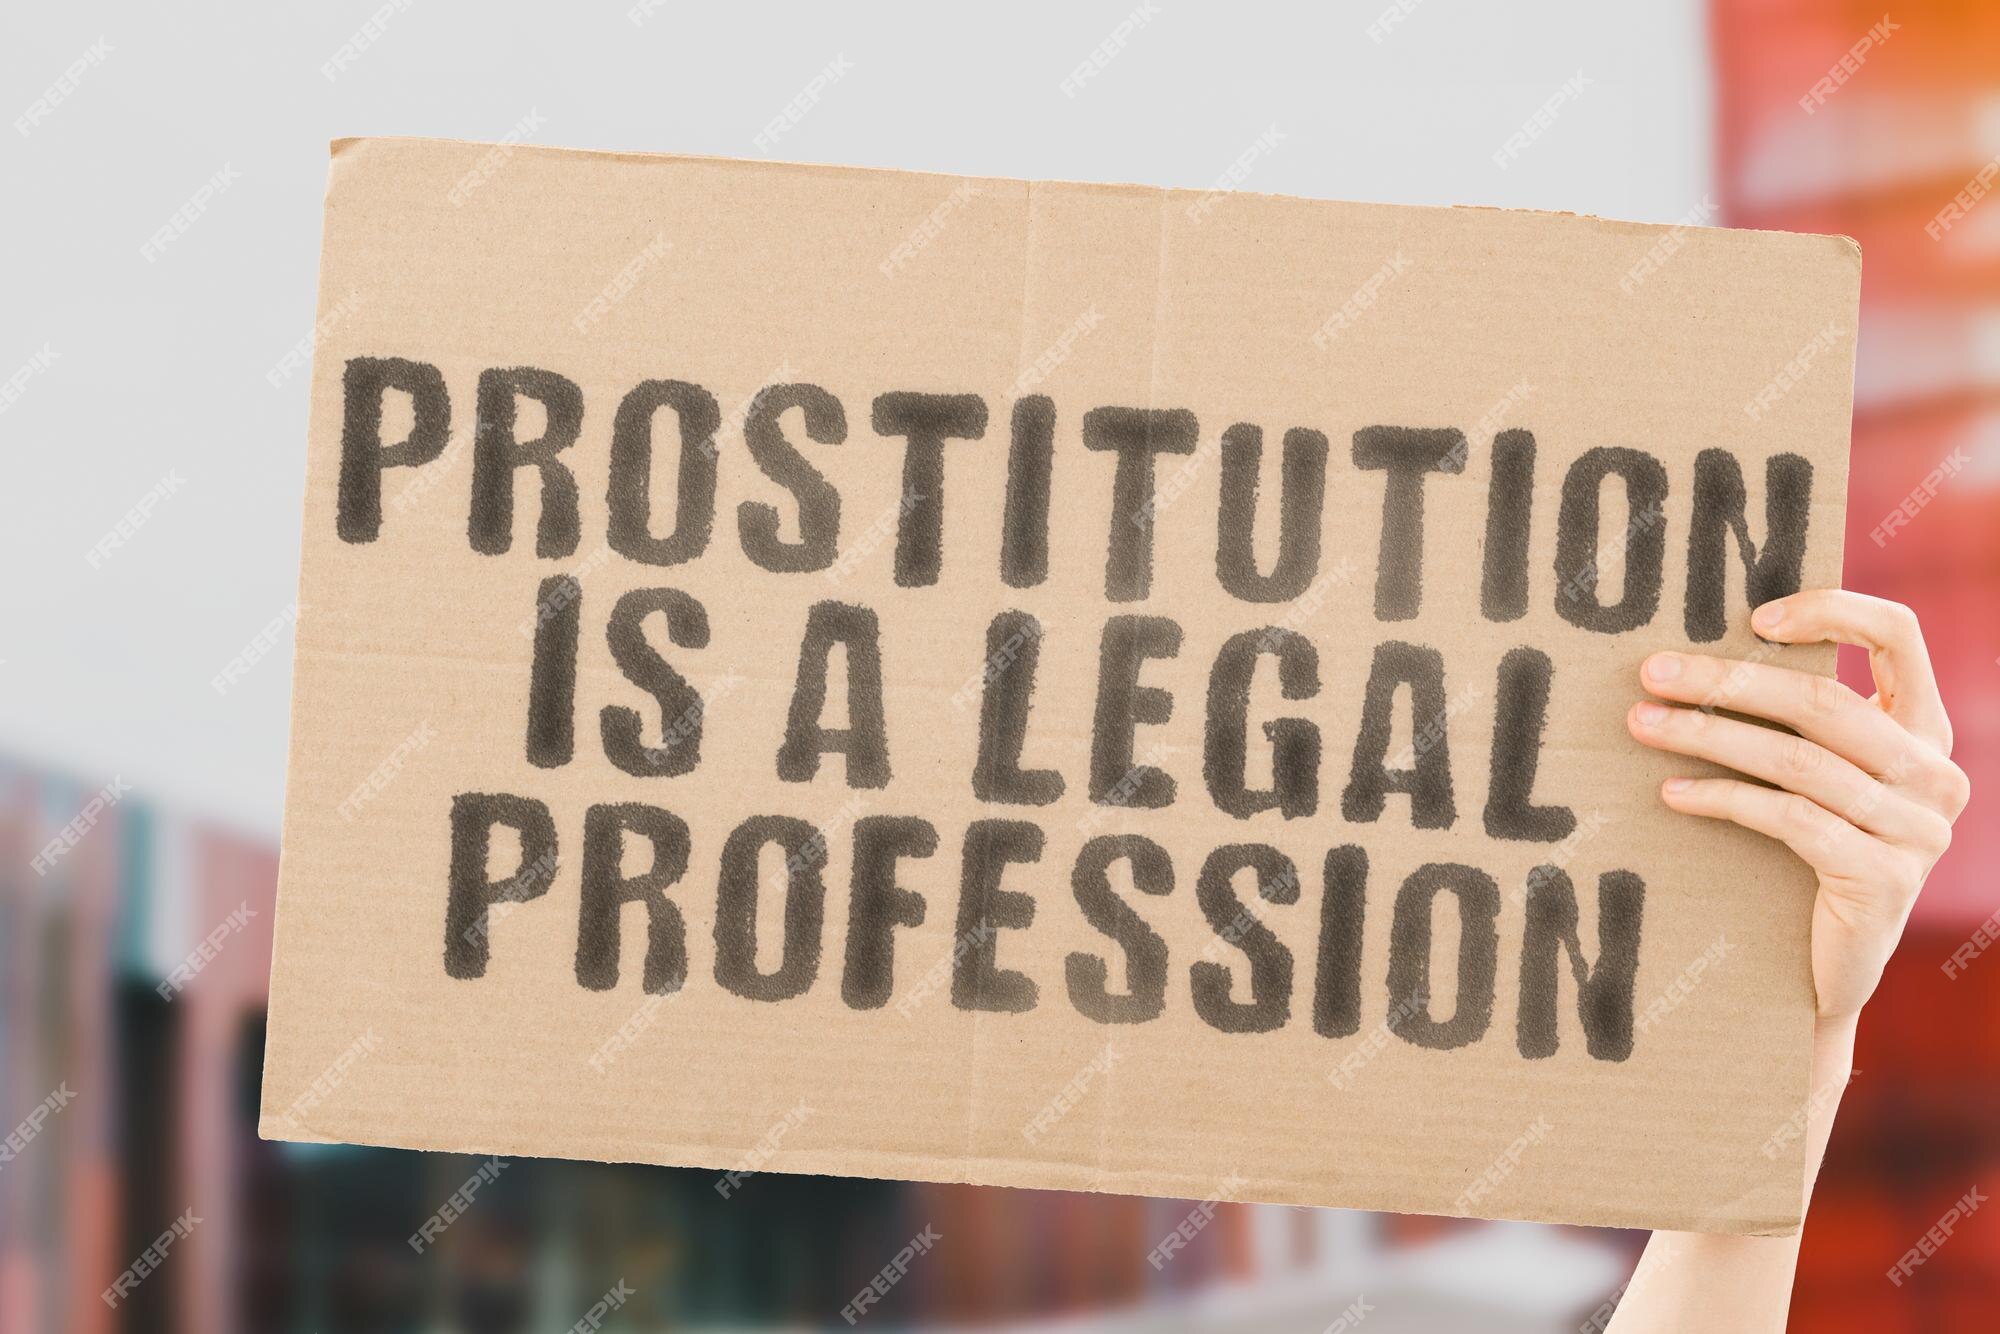 phrase-prostitution-is-legal-profession-banner-men-s-hand-with-blurred-background-sex-industry-service-escort-body-earnings-taxes-legislation-clients_75939-906.jpg